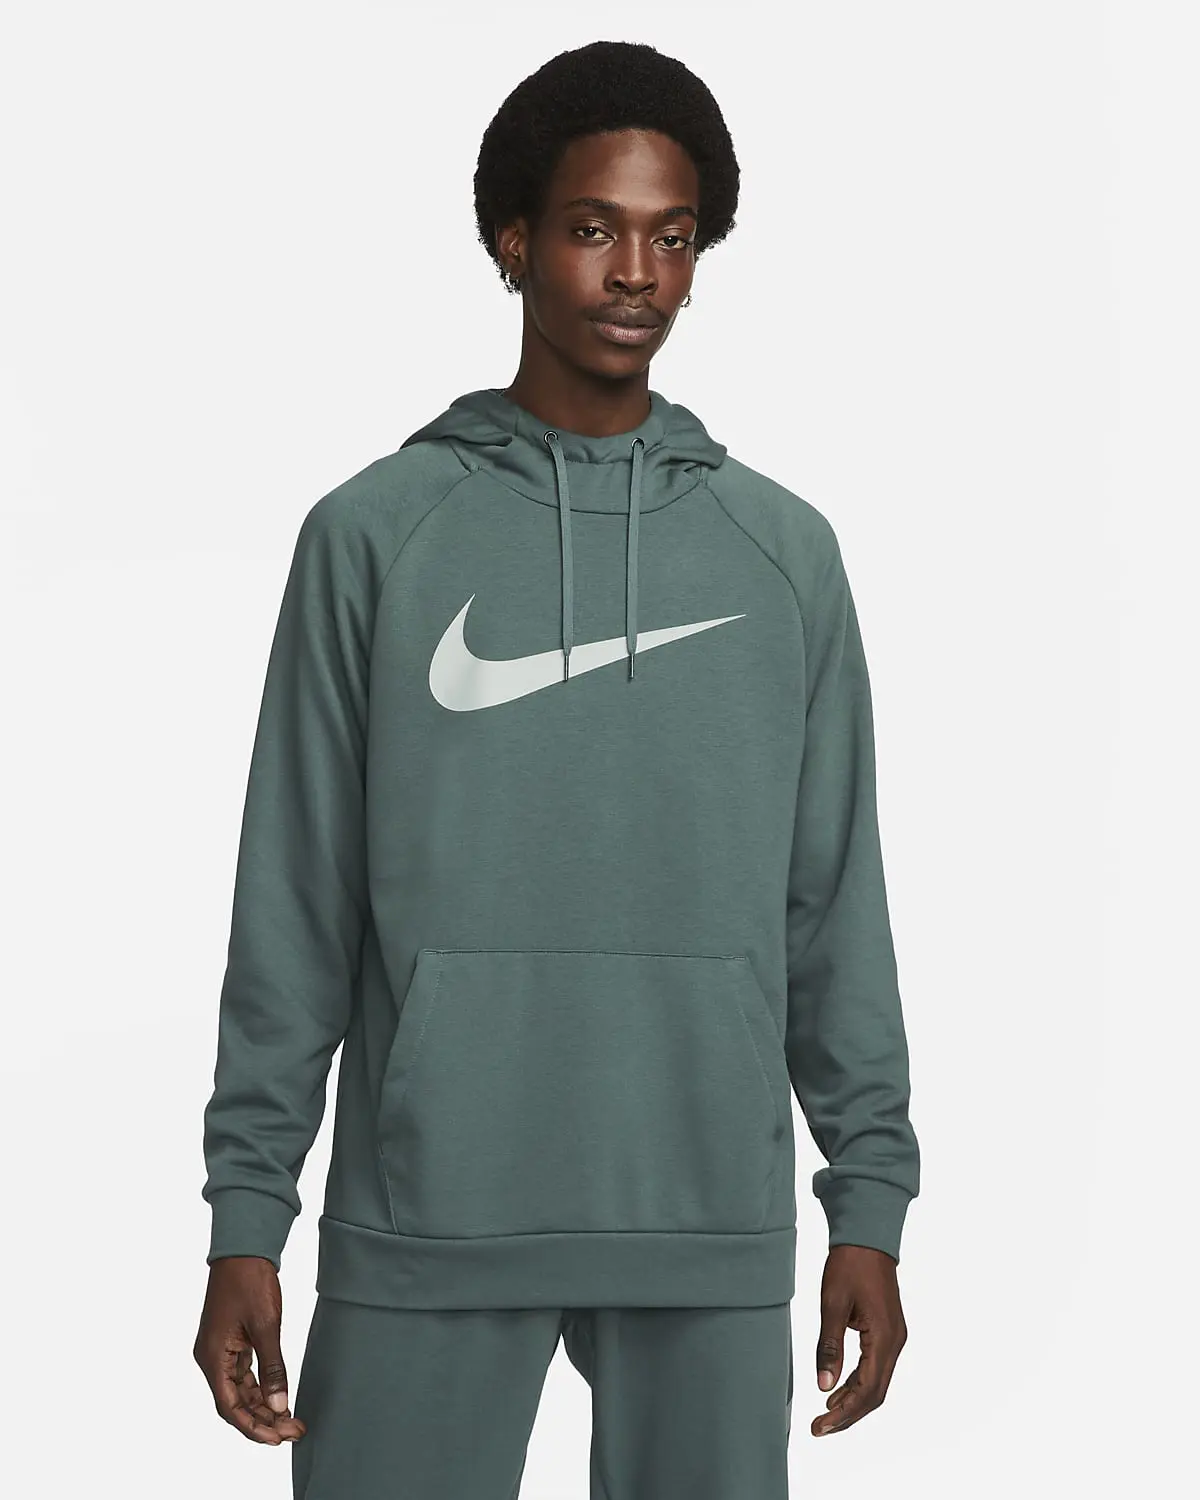 Nike Dry Graphic. 1